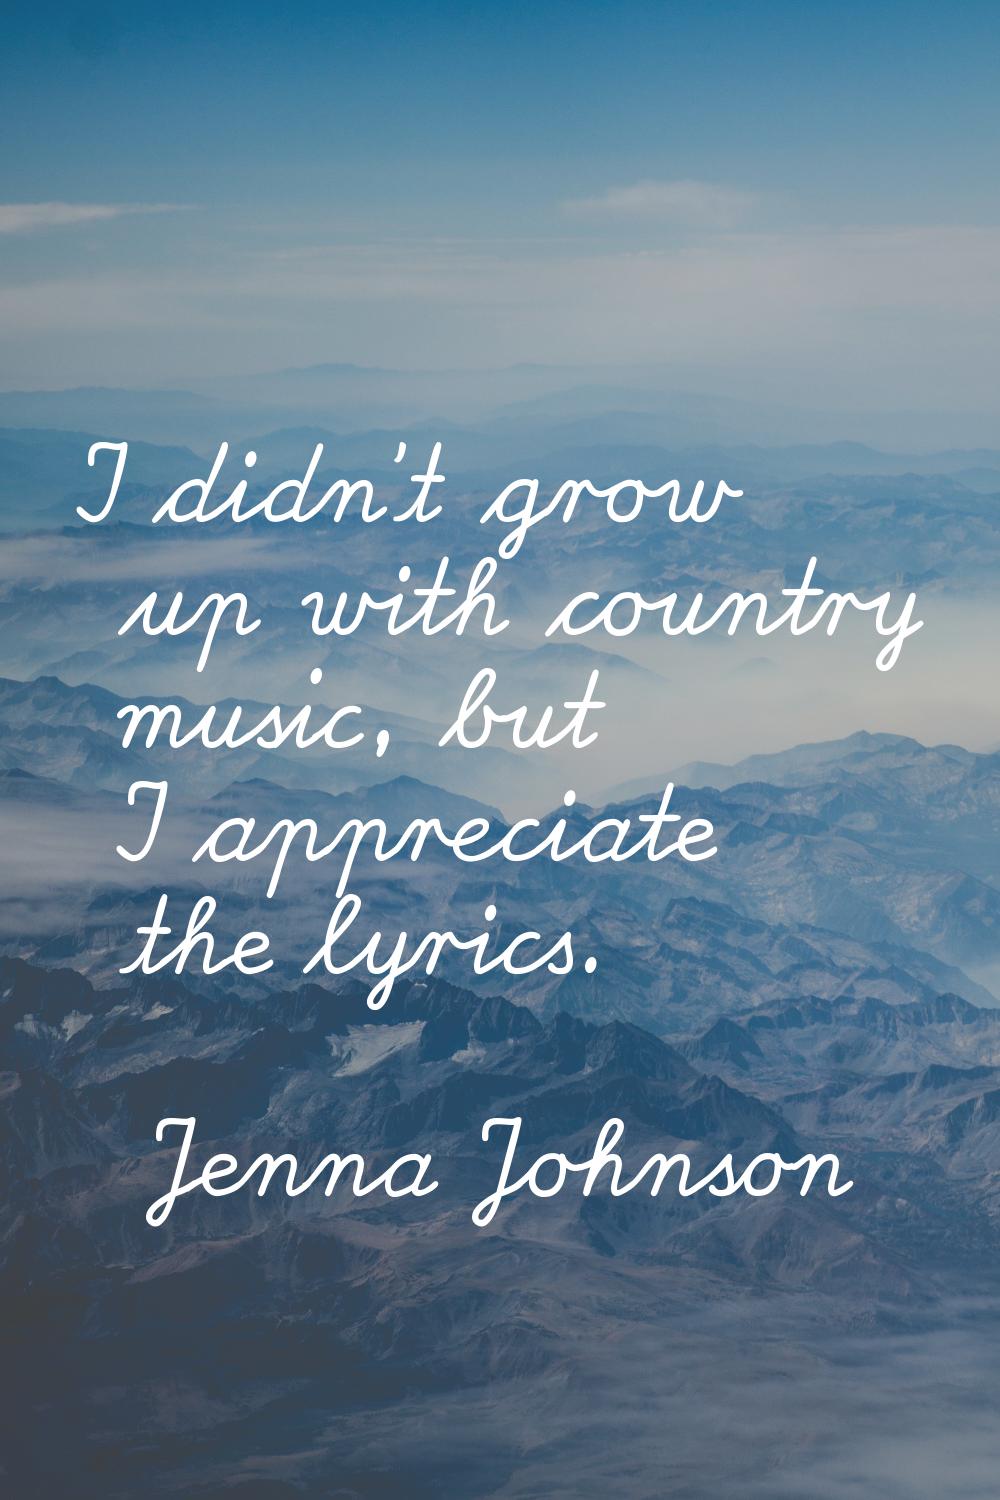 I didn’t grow up with country music, but I appreciate the lyrics.